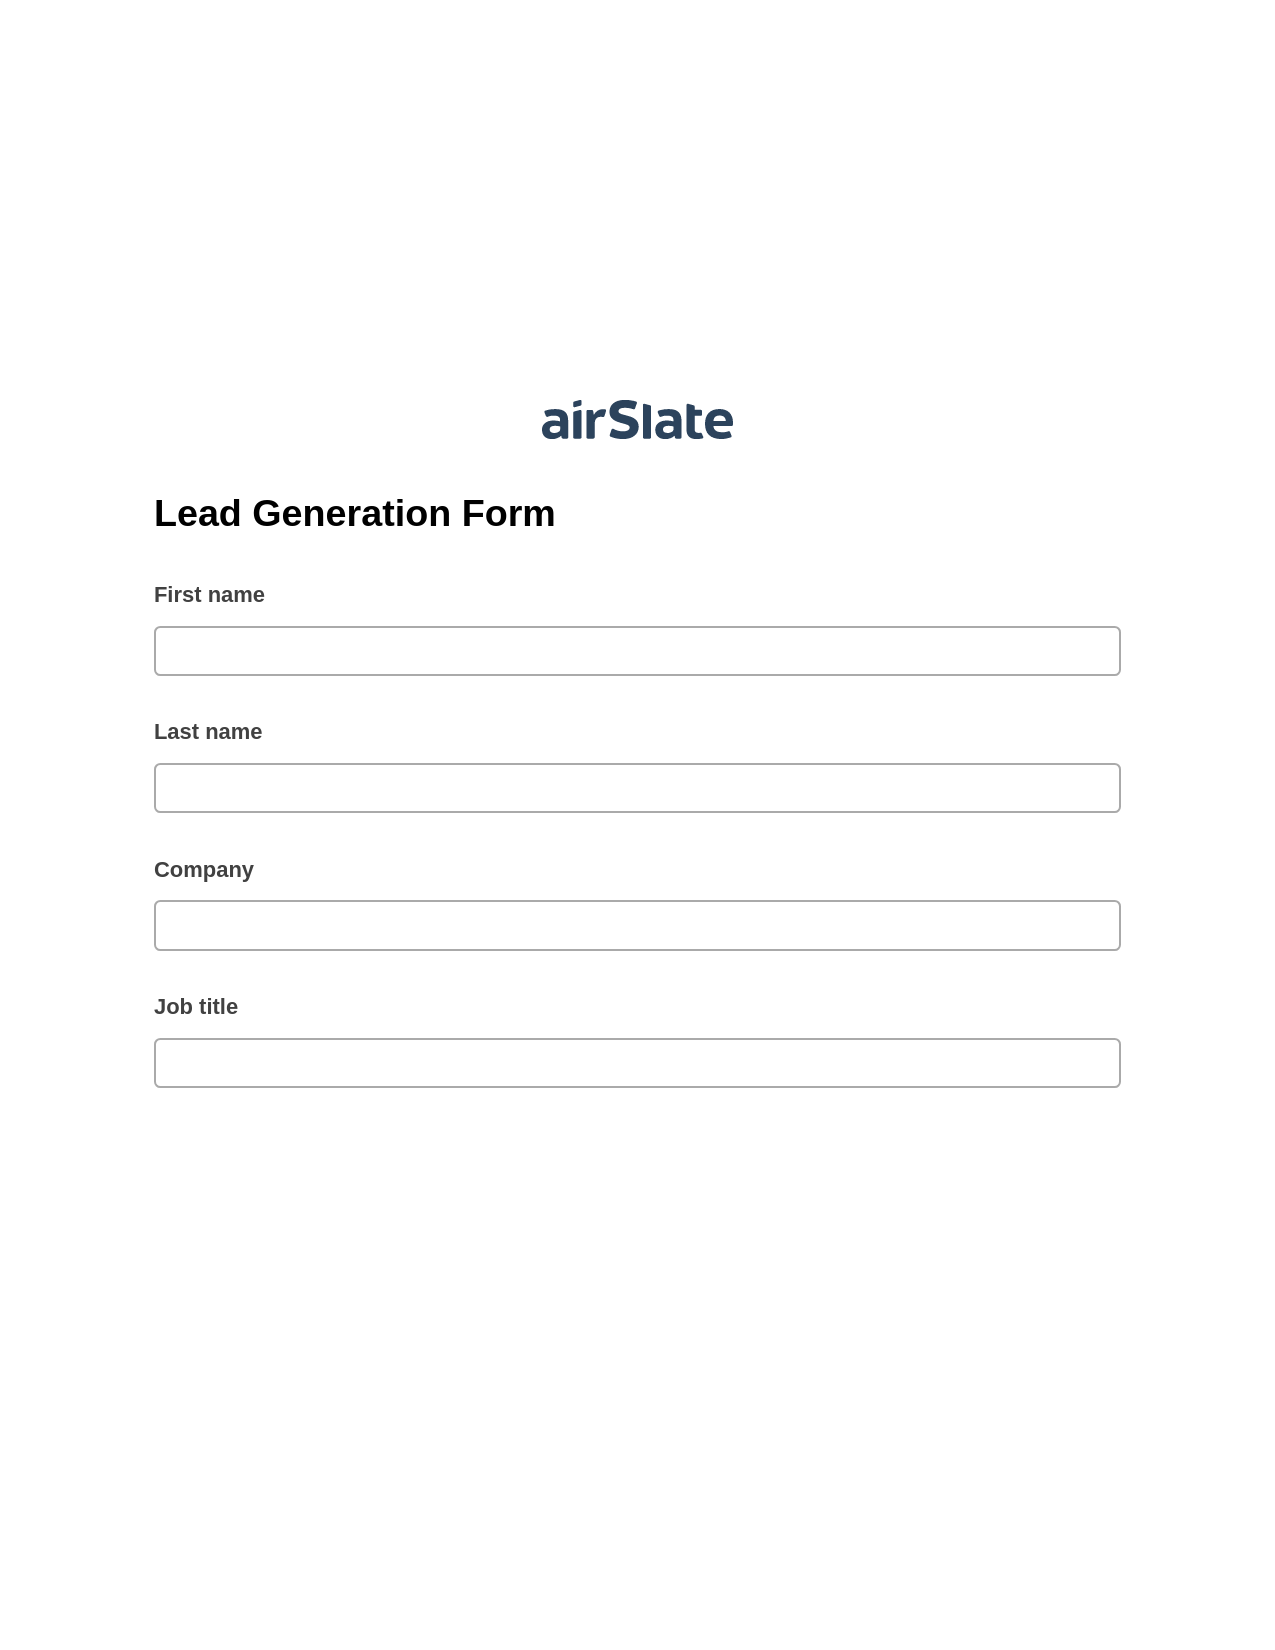 Lead Generation Form Pre-fill from MySQL Bot, Send a Slate with Roles Bot, Archive to Box Bot